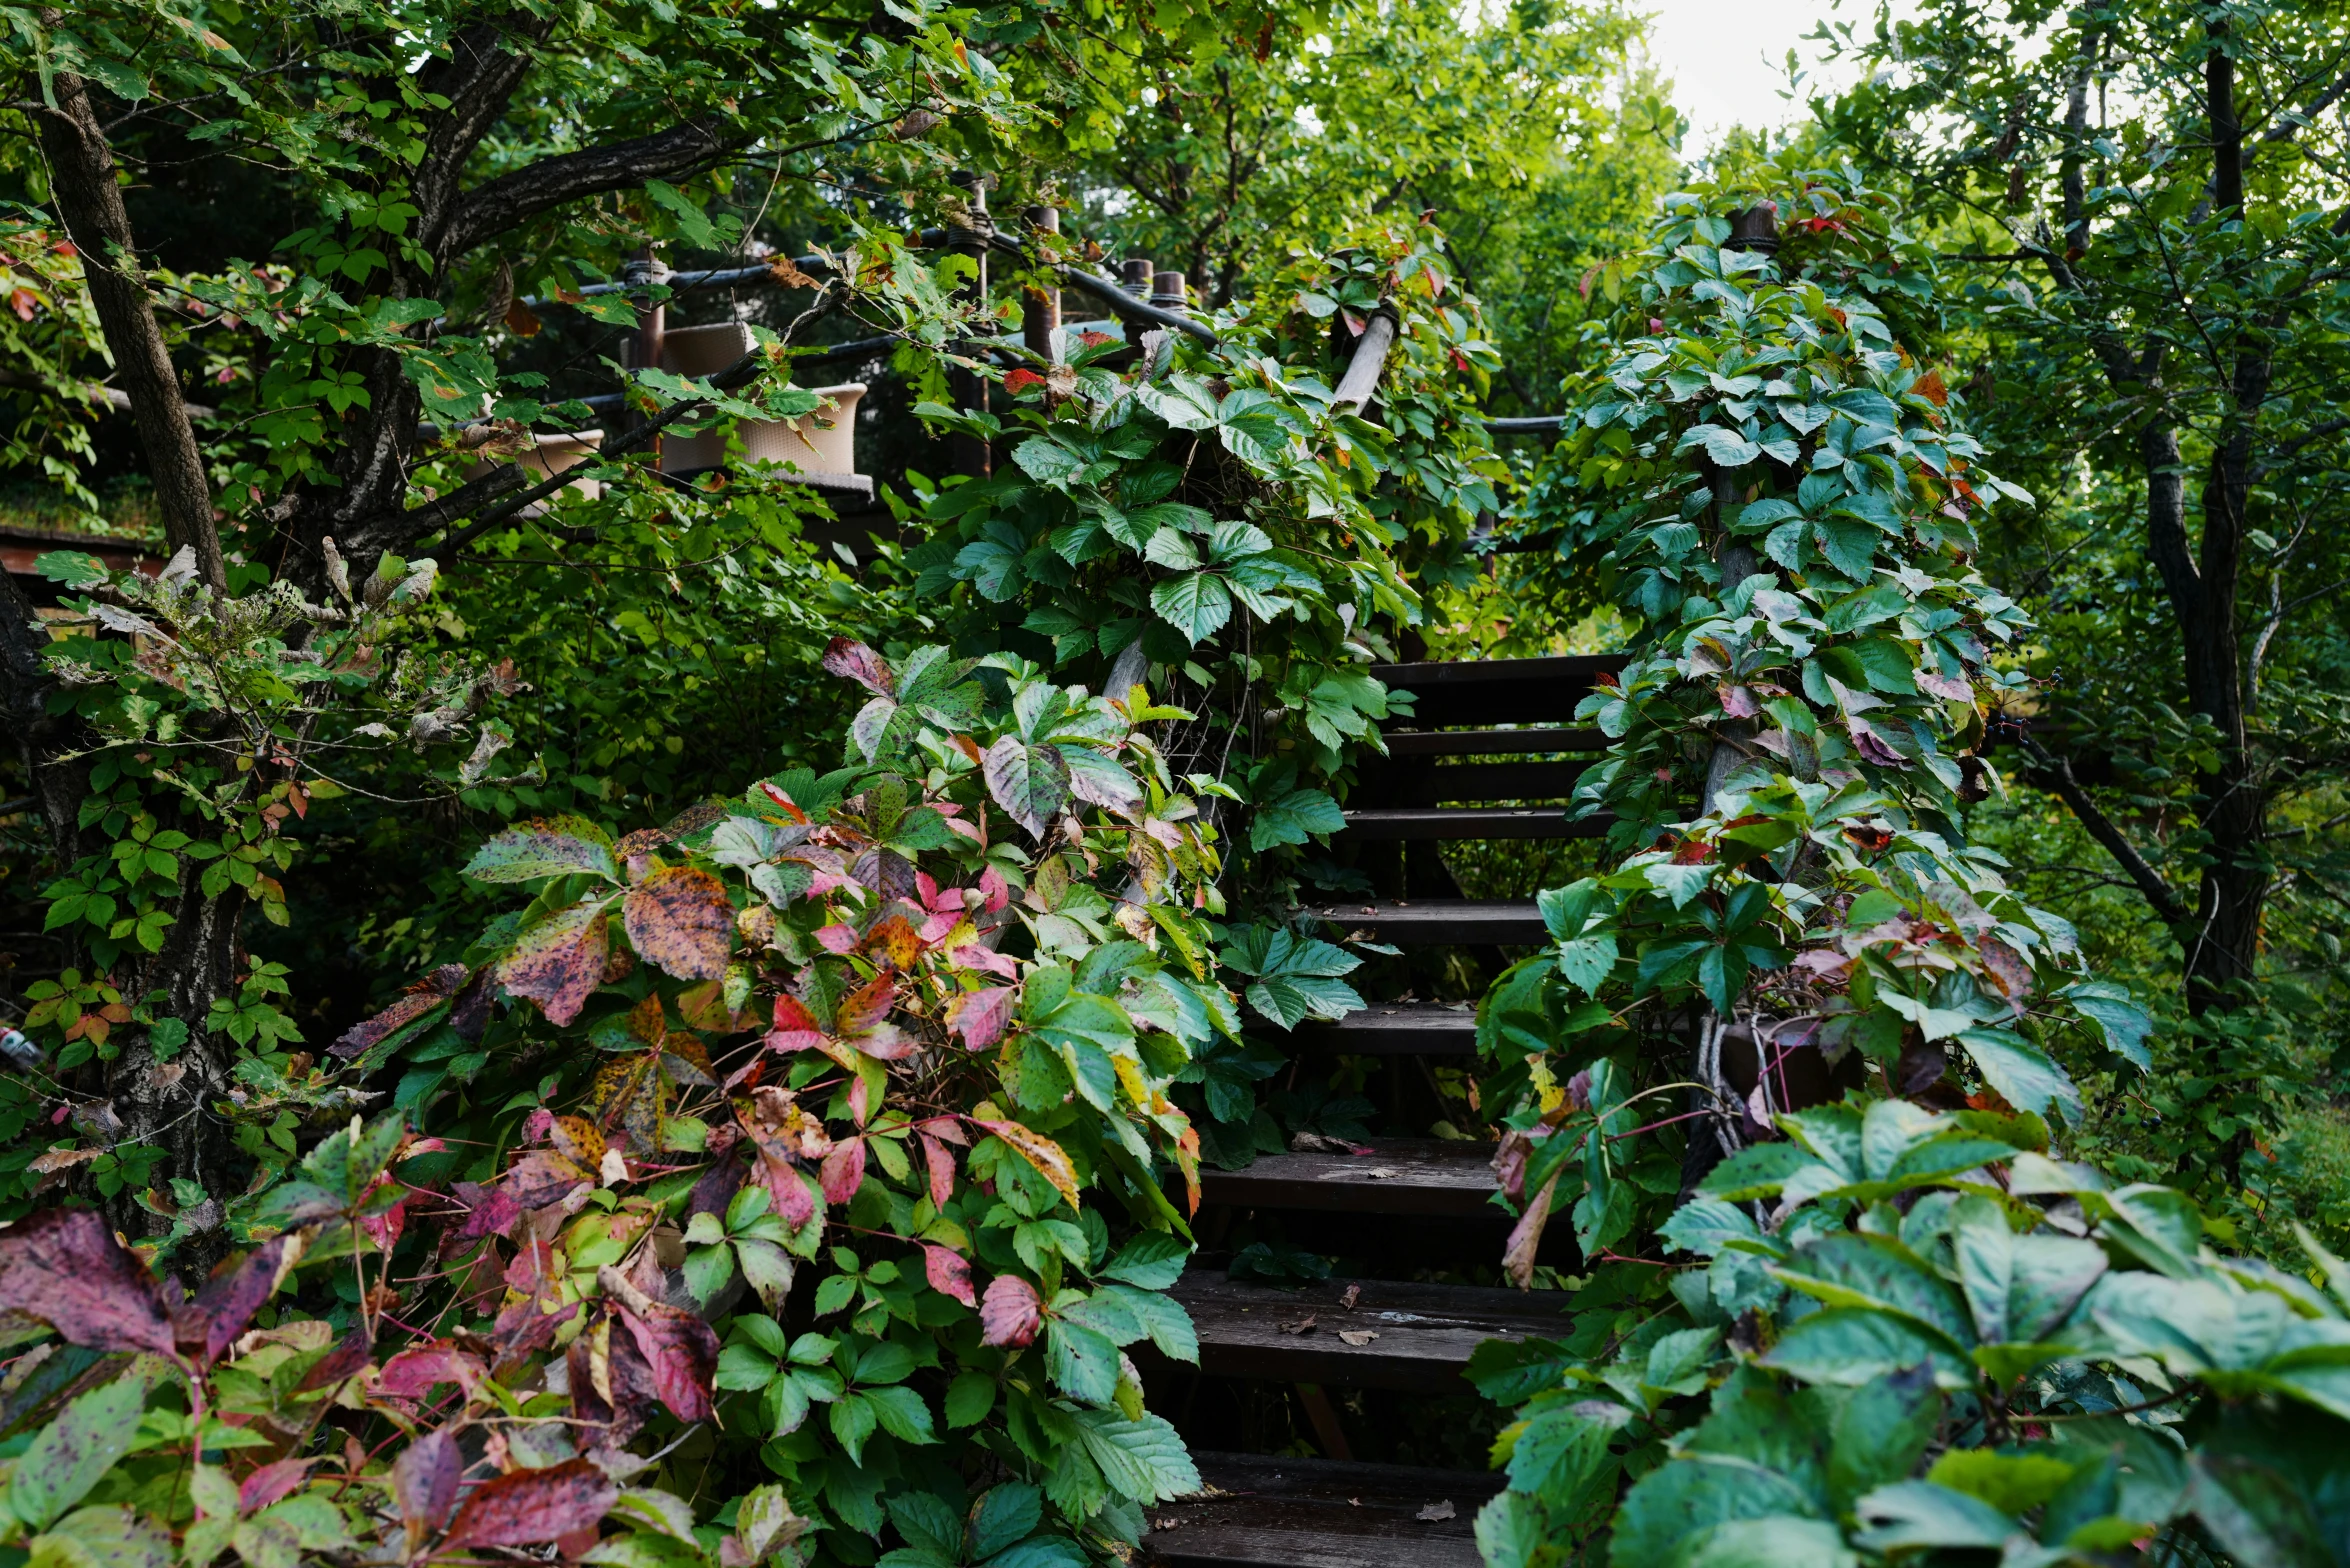 the stairs are overgrown and overgrown with colorful leaves